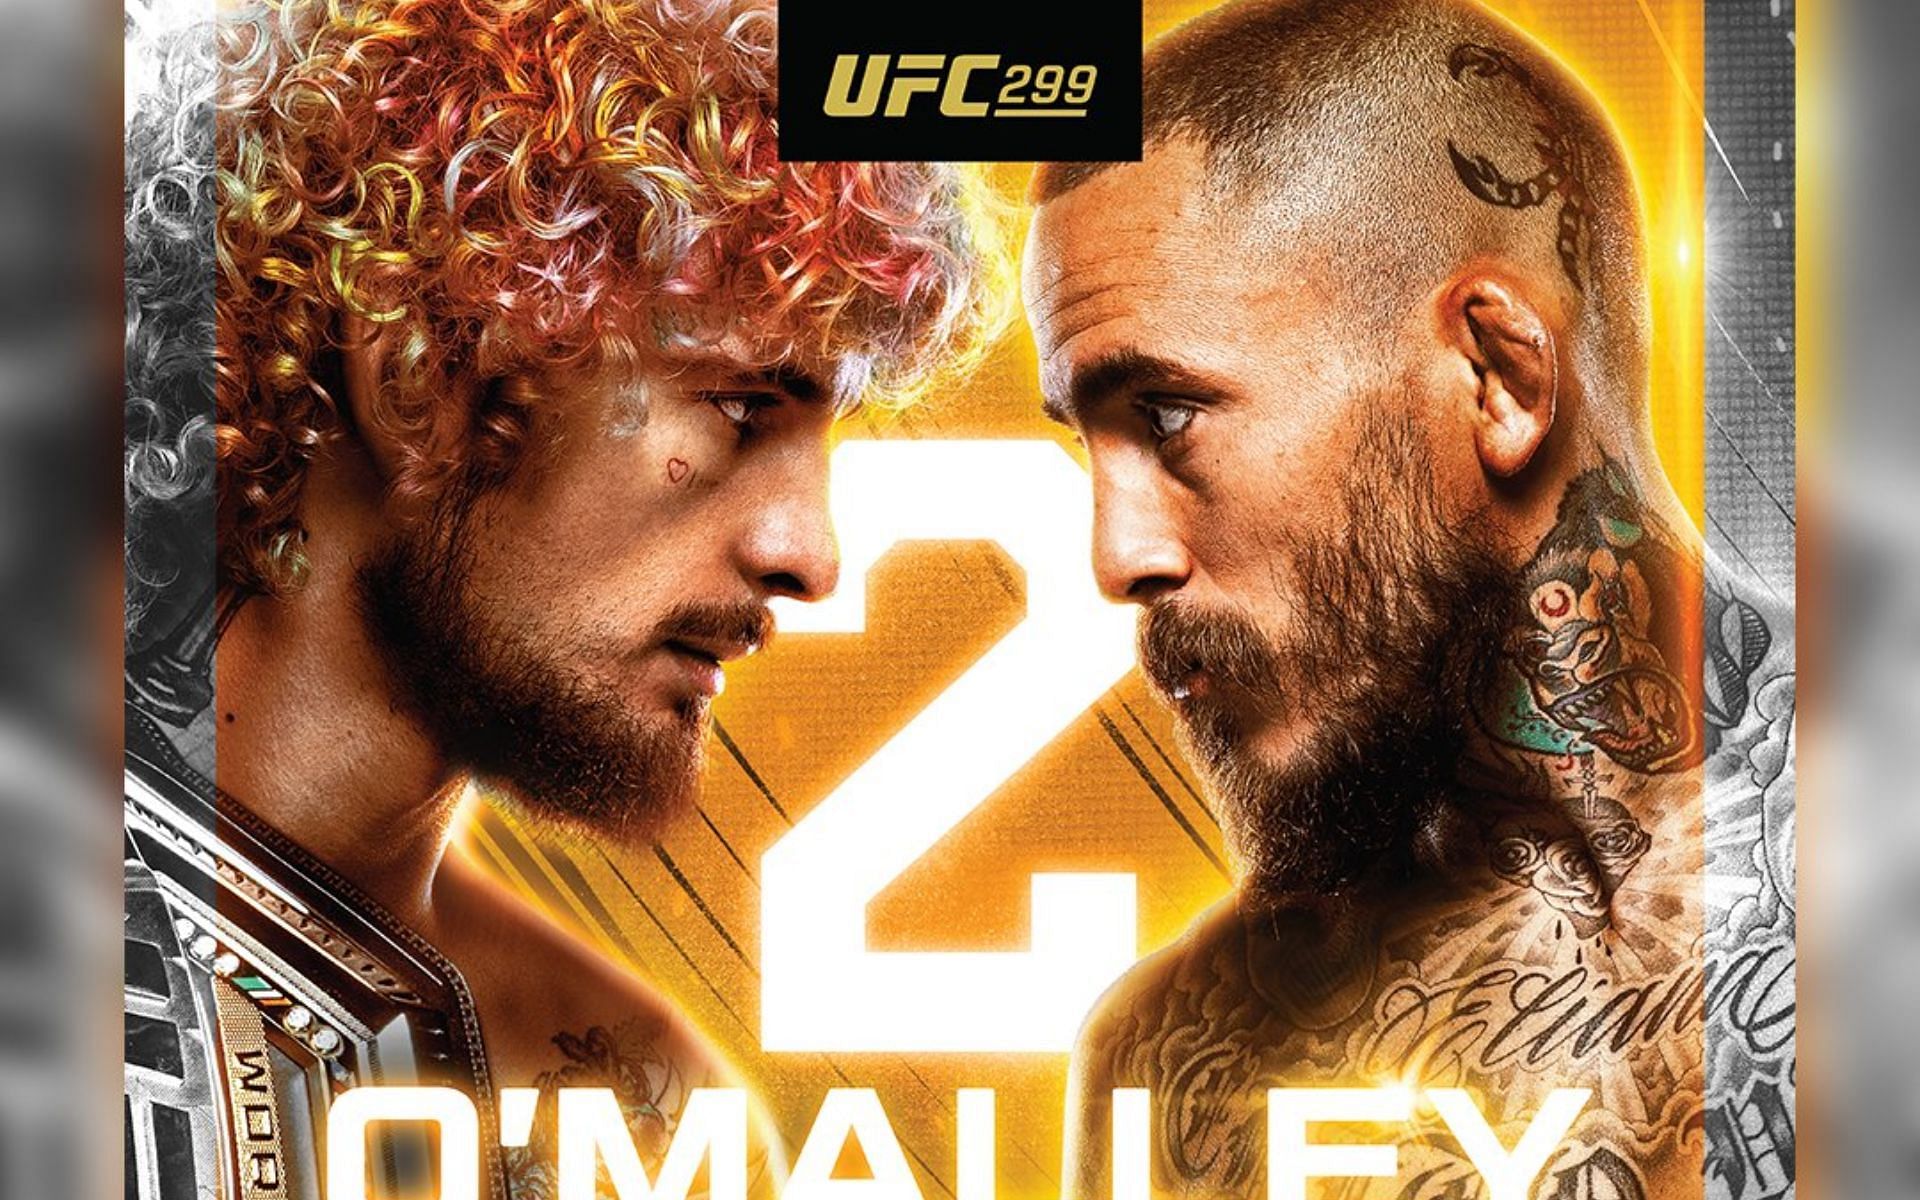 "Miami is going to implode" Fans react as poster for UFC 299